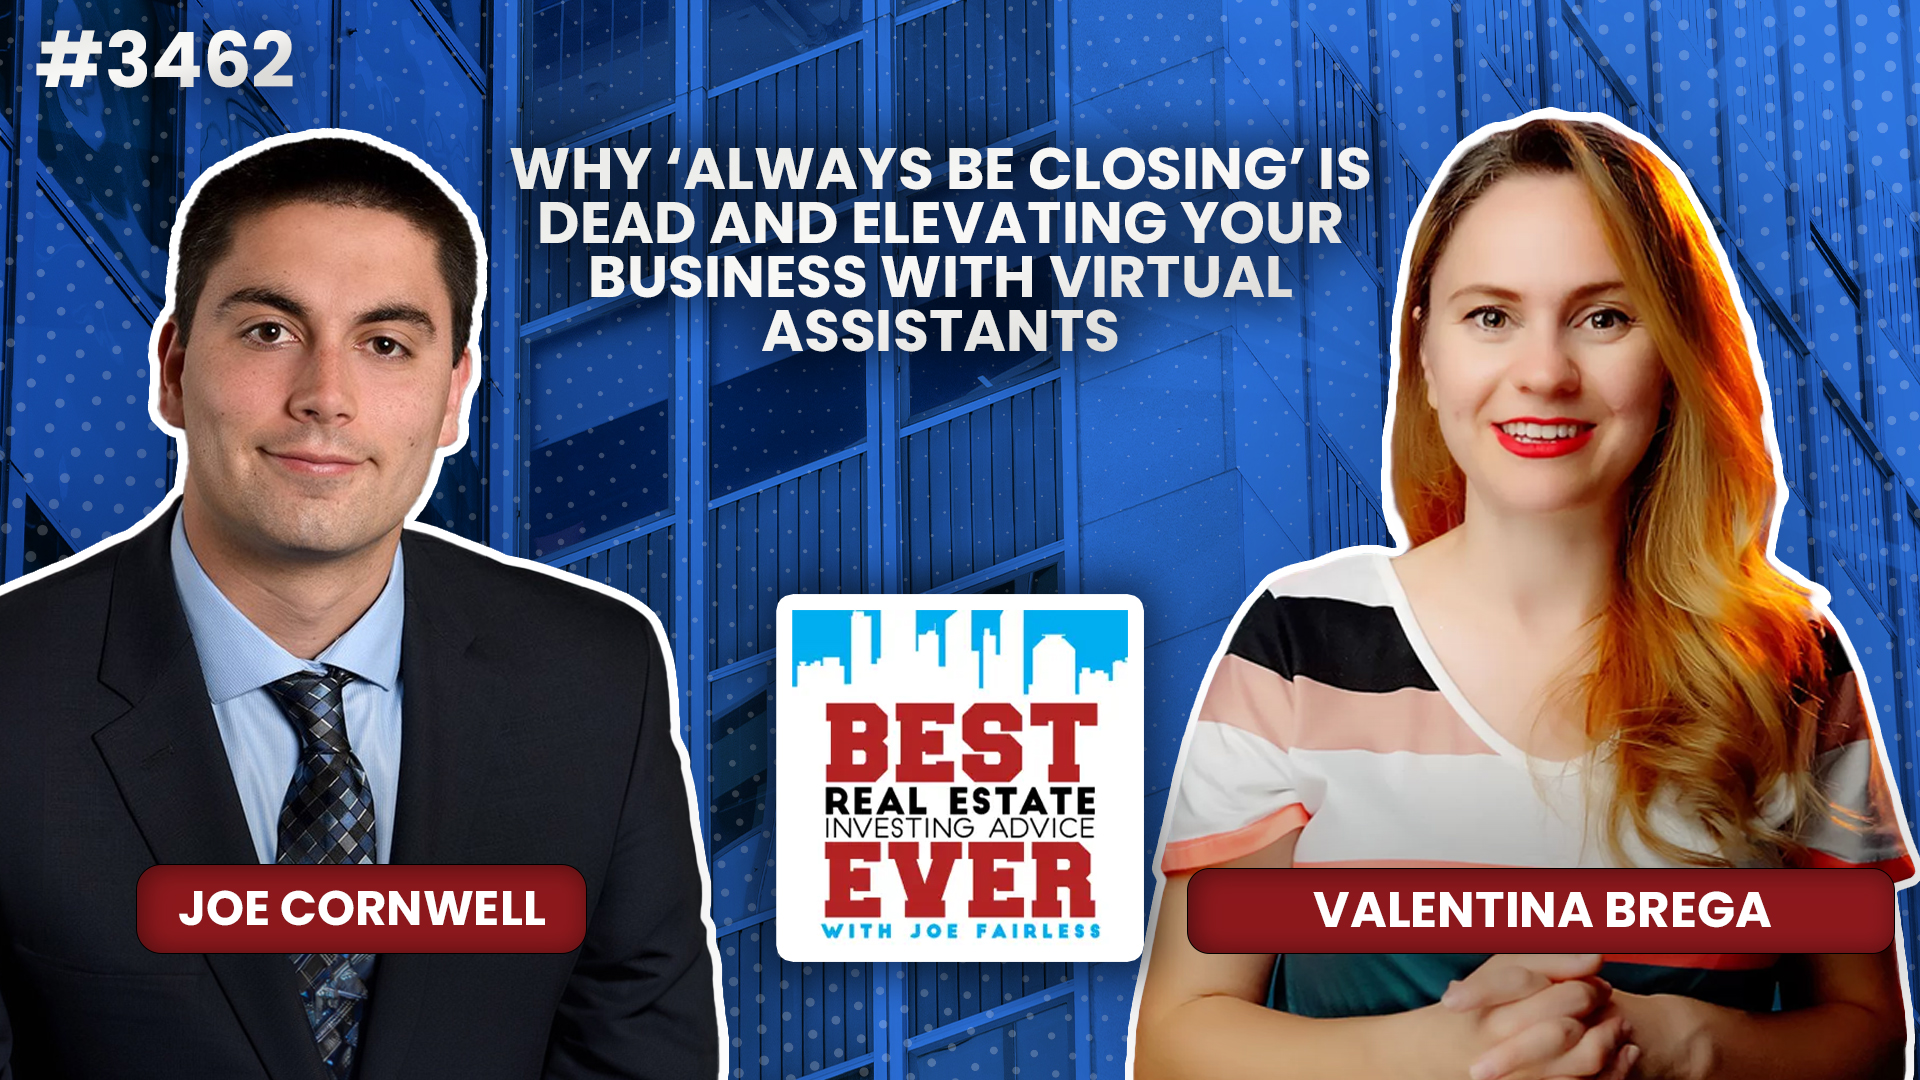 JF3462: Why ‘Always Be Closing’ Is Dead and Elevating Your Business with Virtual Assistants ft. Valentina Brega